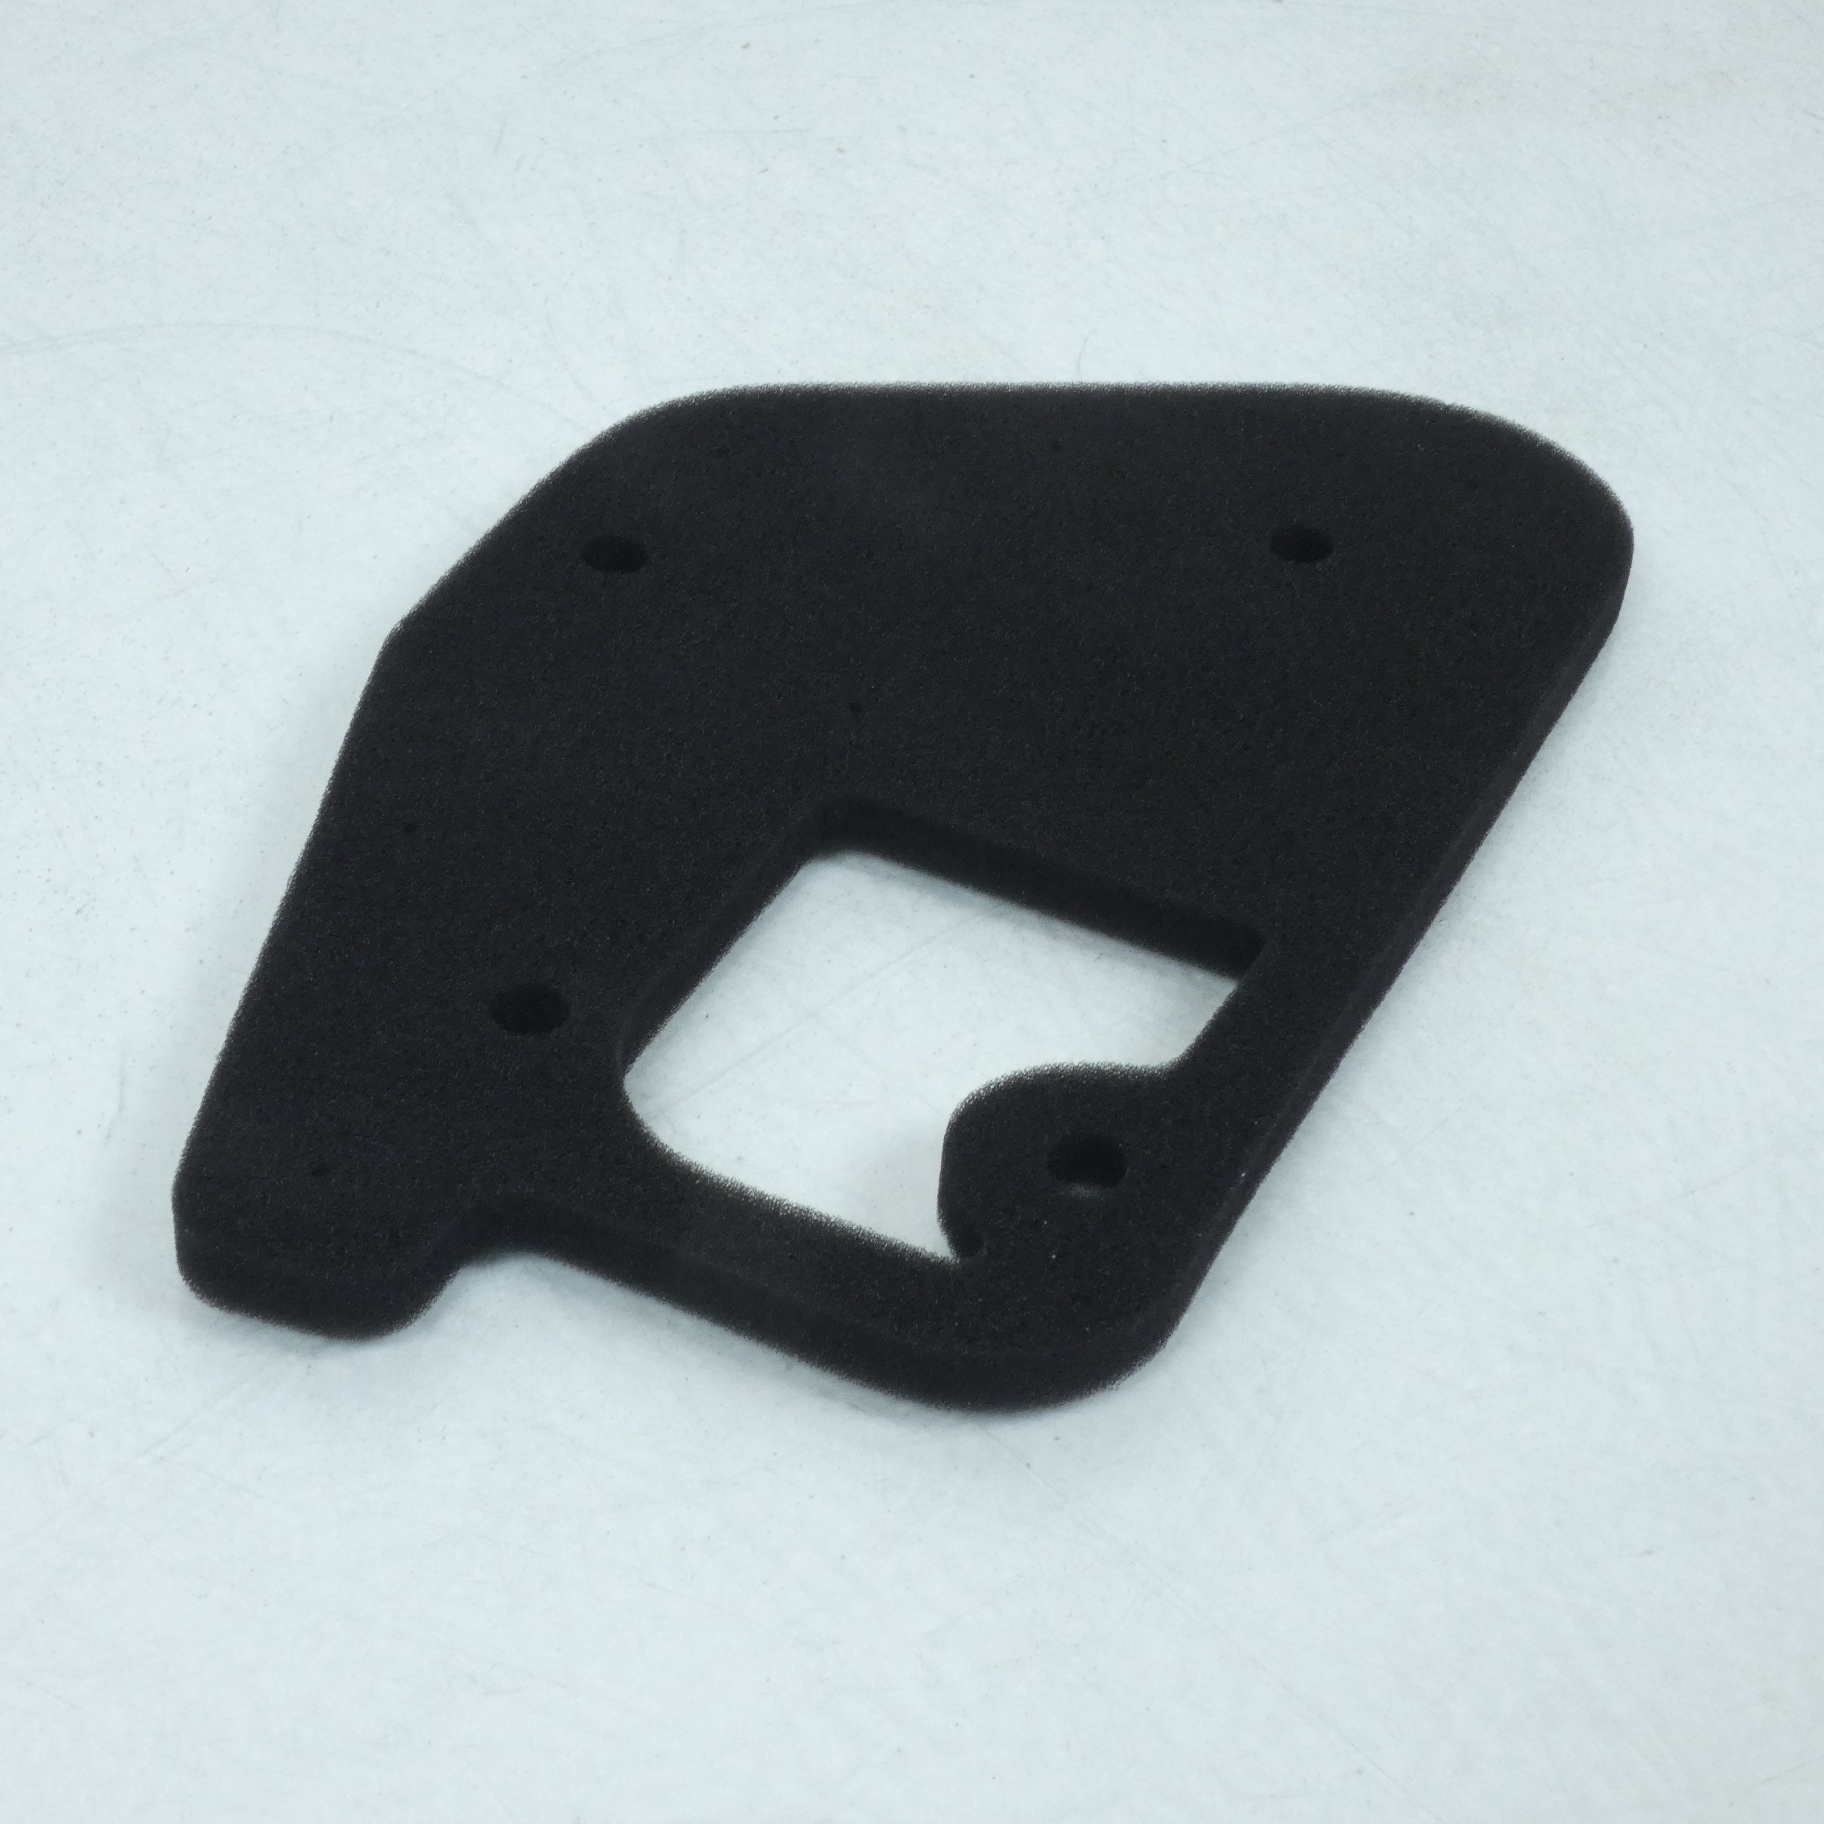 Filtre à air Sifam pour scooter Yamaha 50 Spy 1997-2011 Neuf